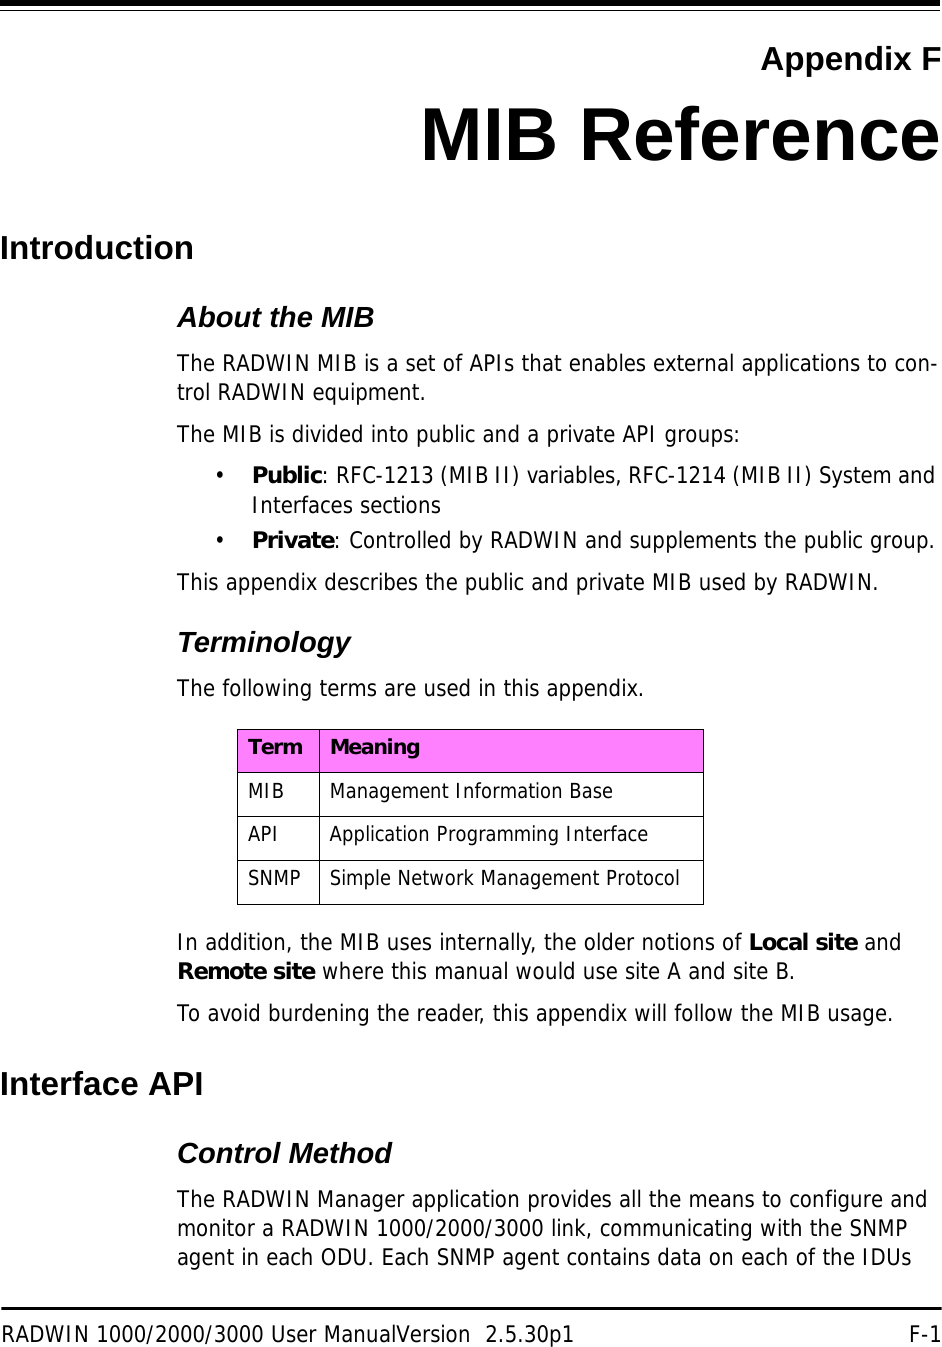 RADWIN 1000/2000/3000 User ManualVersion  2.5.30p1 F-1Appendix FMIB ReferenceIntroductionAbout the MIBThe RADWIN MIB is a set of APIs that enables external applications to con-trol RADWIN equipment.The MIB is divided into public and a private API groups:•Public: RFC-1213 (MIB II) variables, RFC-1214 (MIB II) System and Interfaces sections•Private: Controlled by RADWIN and supplements the public group.This appendix describes the public and private MIB used by RADWIN.TerminologyThe following terms are used in this appendix.In addition, the MIB uses internally, the older notions of Local site and Remote site where this manual would use site A and site B.To avoid burdening the reader, this appendix will follow the MIB usage.Interface APIControl MethodThe RADWIN Manager application provides all the means to configure and monitor a RADWIN 1000/2000/3000 link, communicating with the SNMP agent in each ODU. Each SNMP agent contains data on each of the IDUs Term MeaningMIB Management Information BaseAPI Application Programming InterfaceSNMP Simple Network Management Protocol